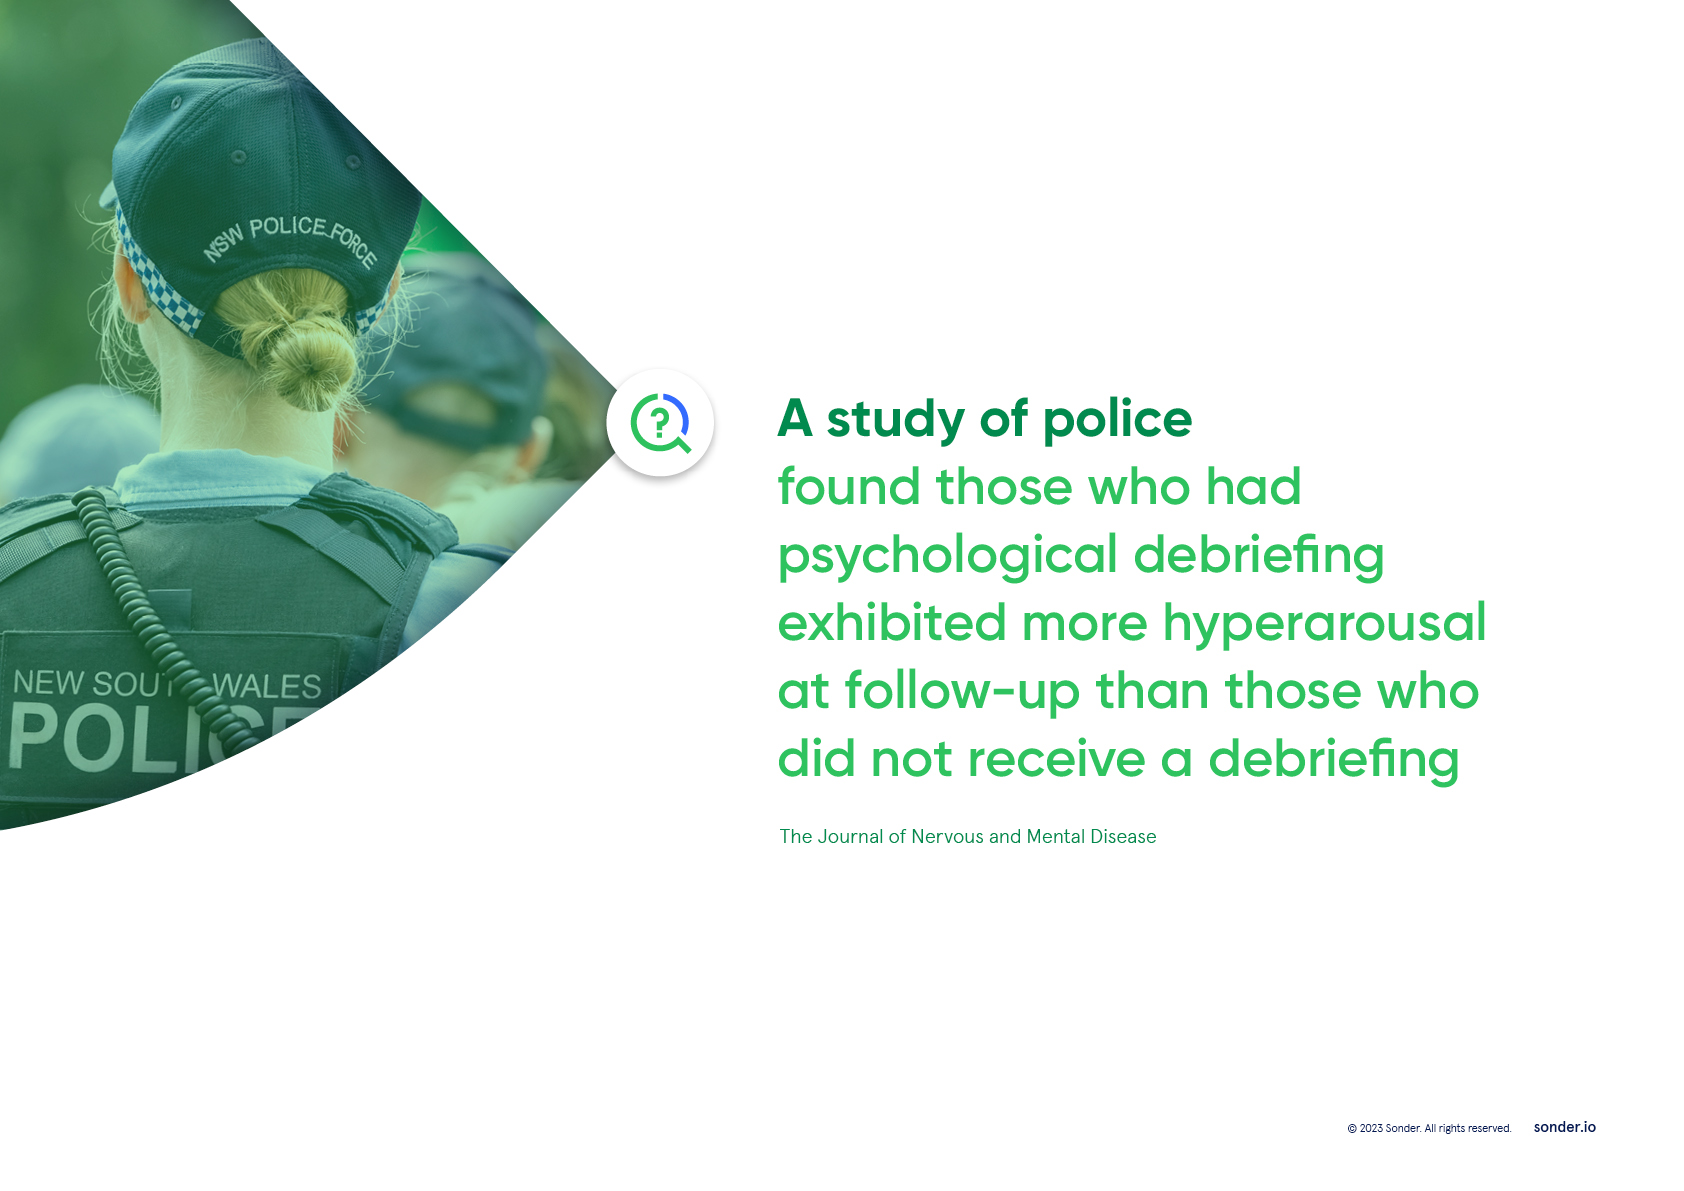 A study of police found those who had psychological debriefing exhibited more hyperarousal at follow-up.